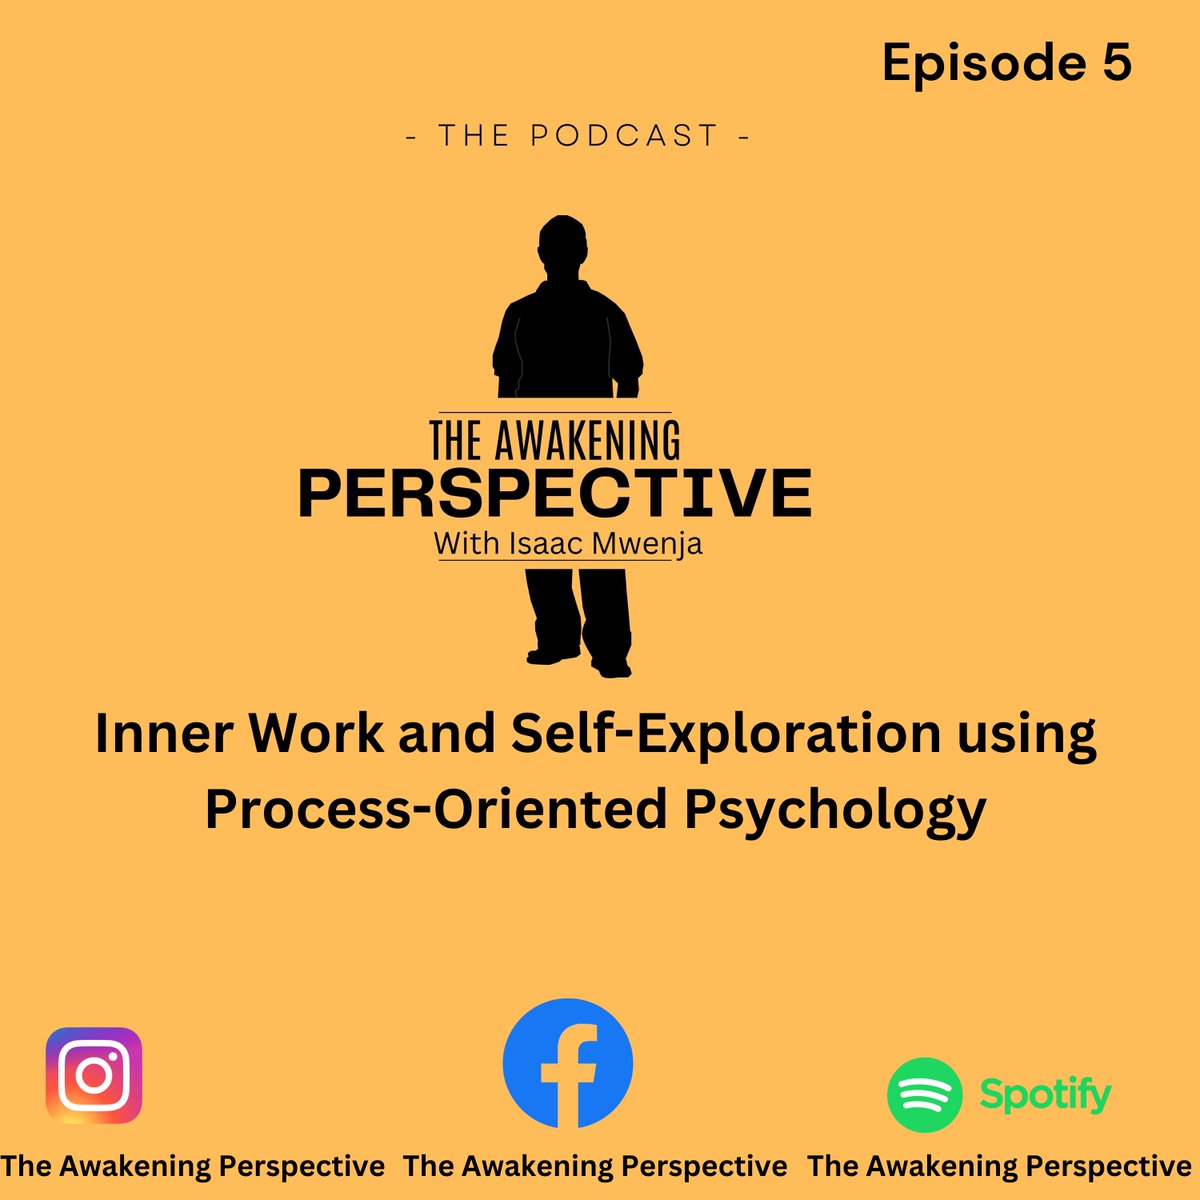 Get ready to explore the hidden depths of your psyche and discover how it shapes your outer world. 🌌💭 We'll unravel real-life stories, techniques, and practical wisdom that can truly transform your life.

#InnerWorkAwakening #ProcessOrientedPsychology #SelfExploration